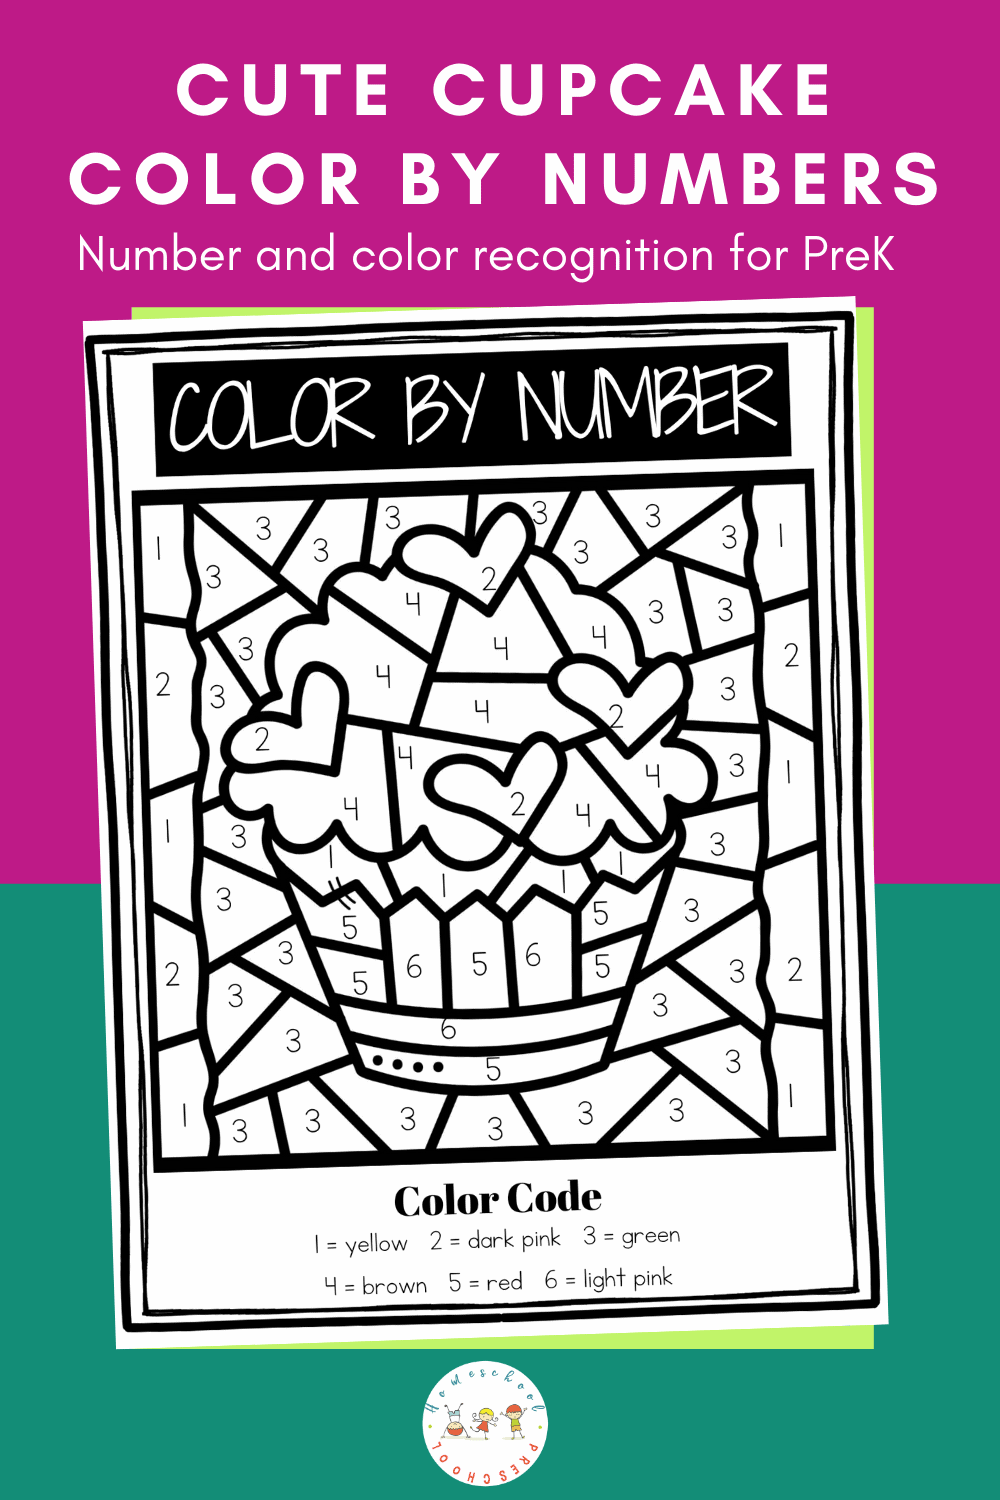 Cupcake Printable Color by Number Pages